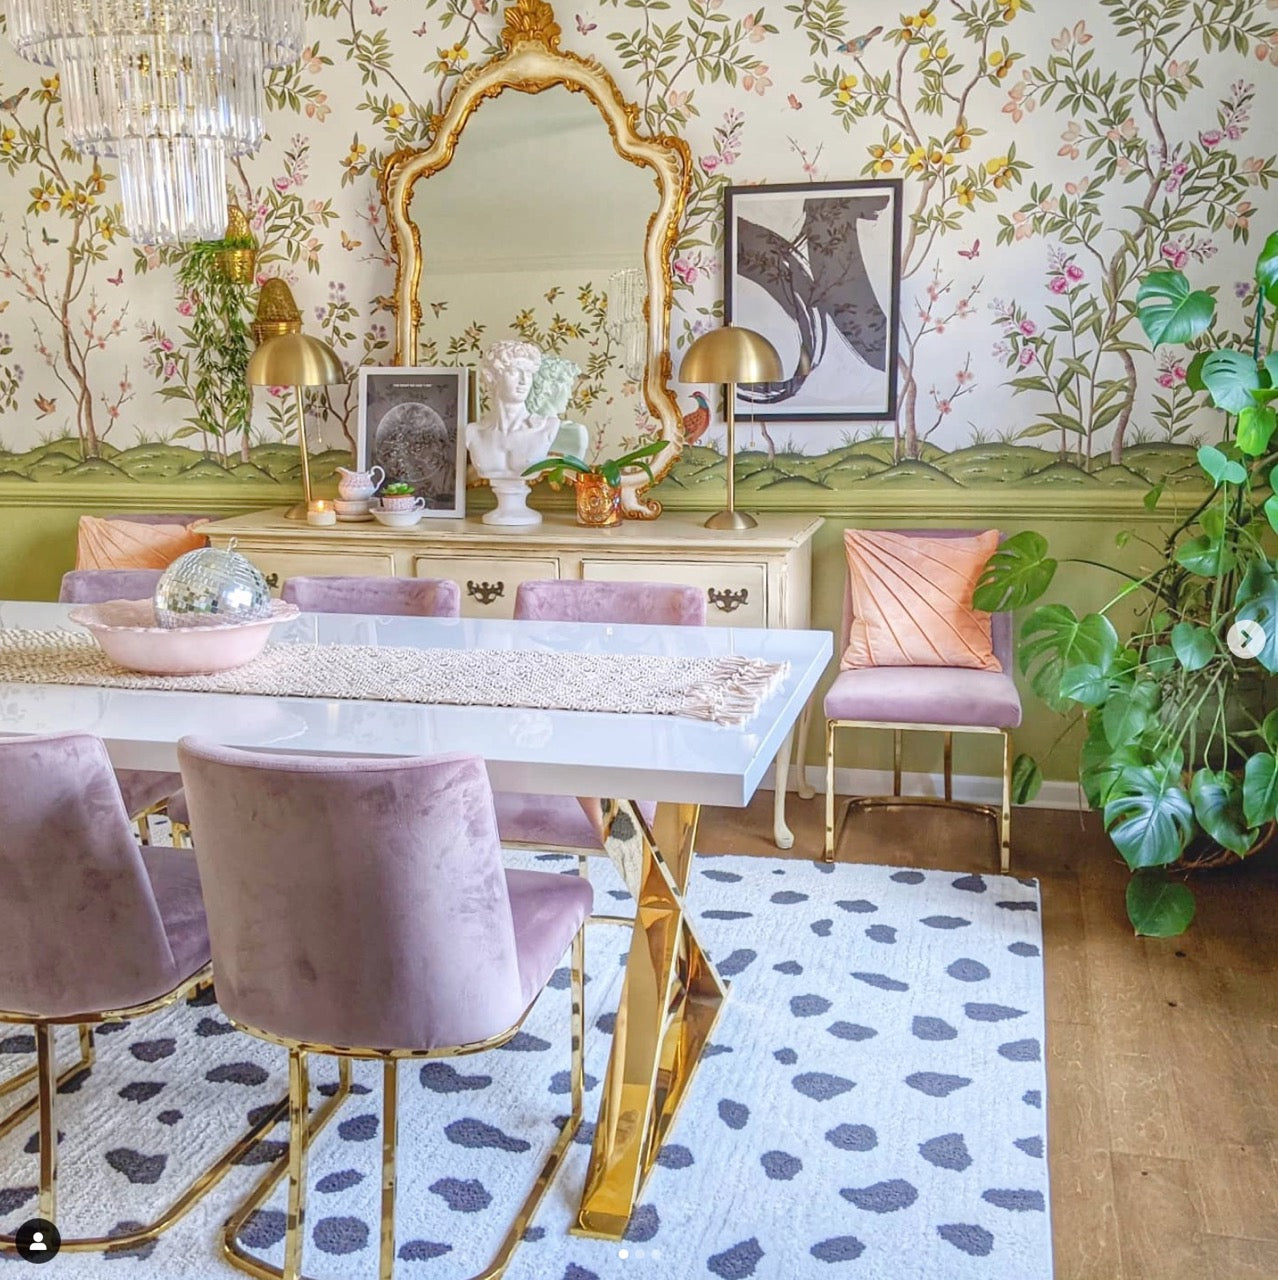 'Grandmillennial' style dining room by blogger 'preppy bohemian at home' featuring chinoiserie chic wallpaper from Rebel Walls by Diane Hill